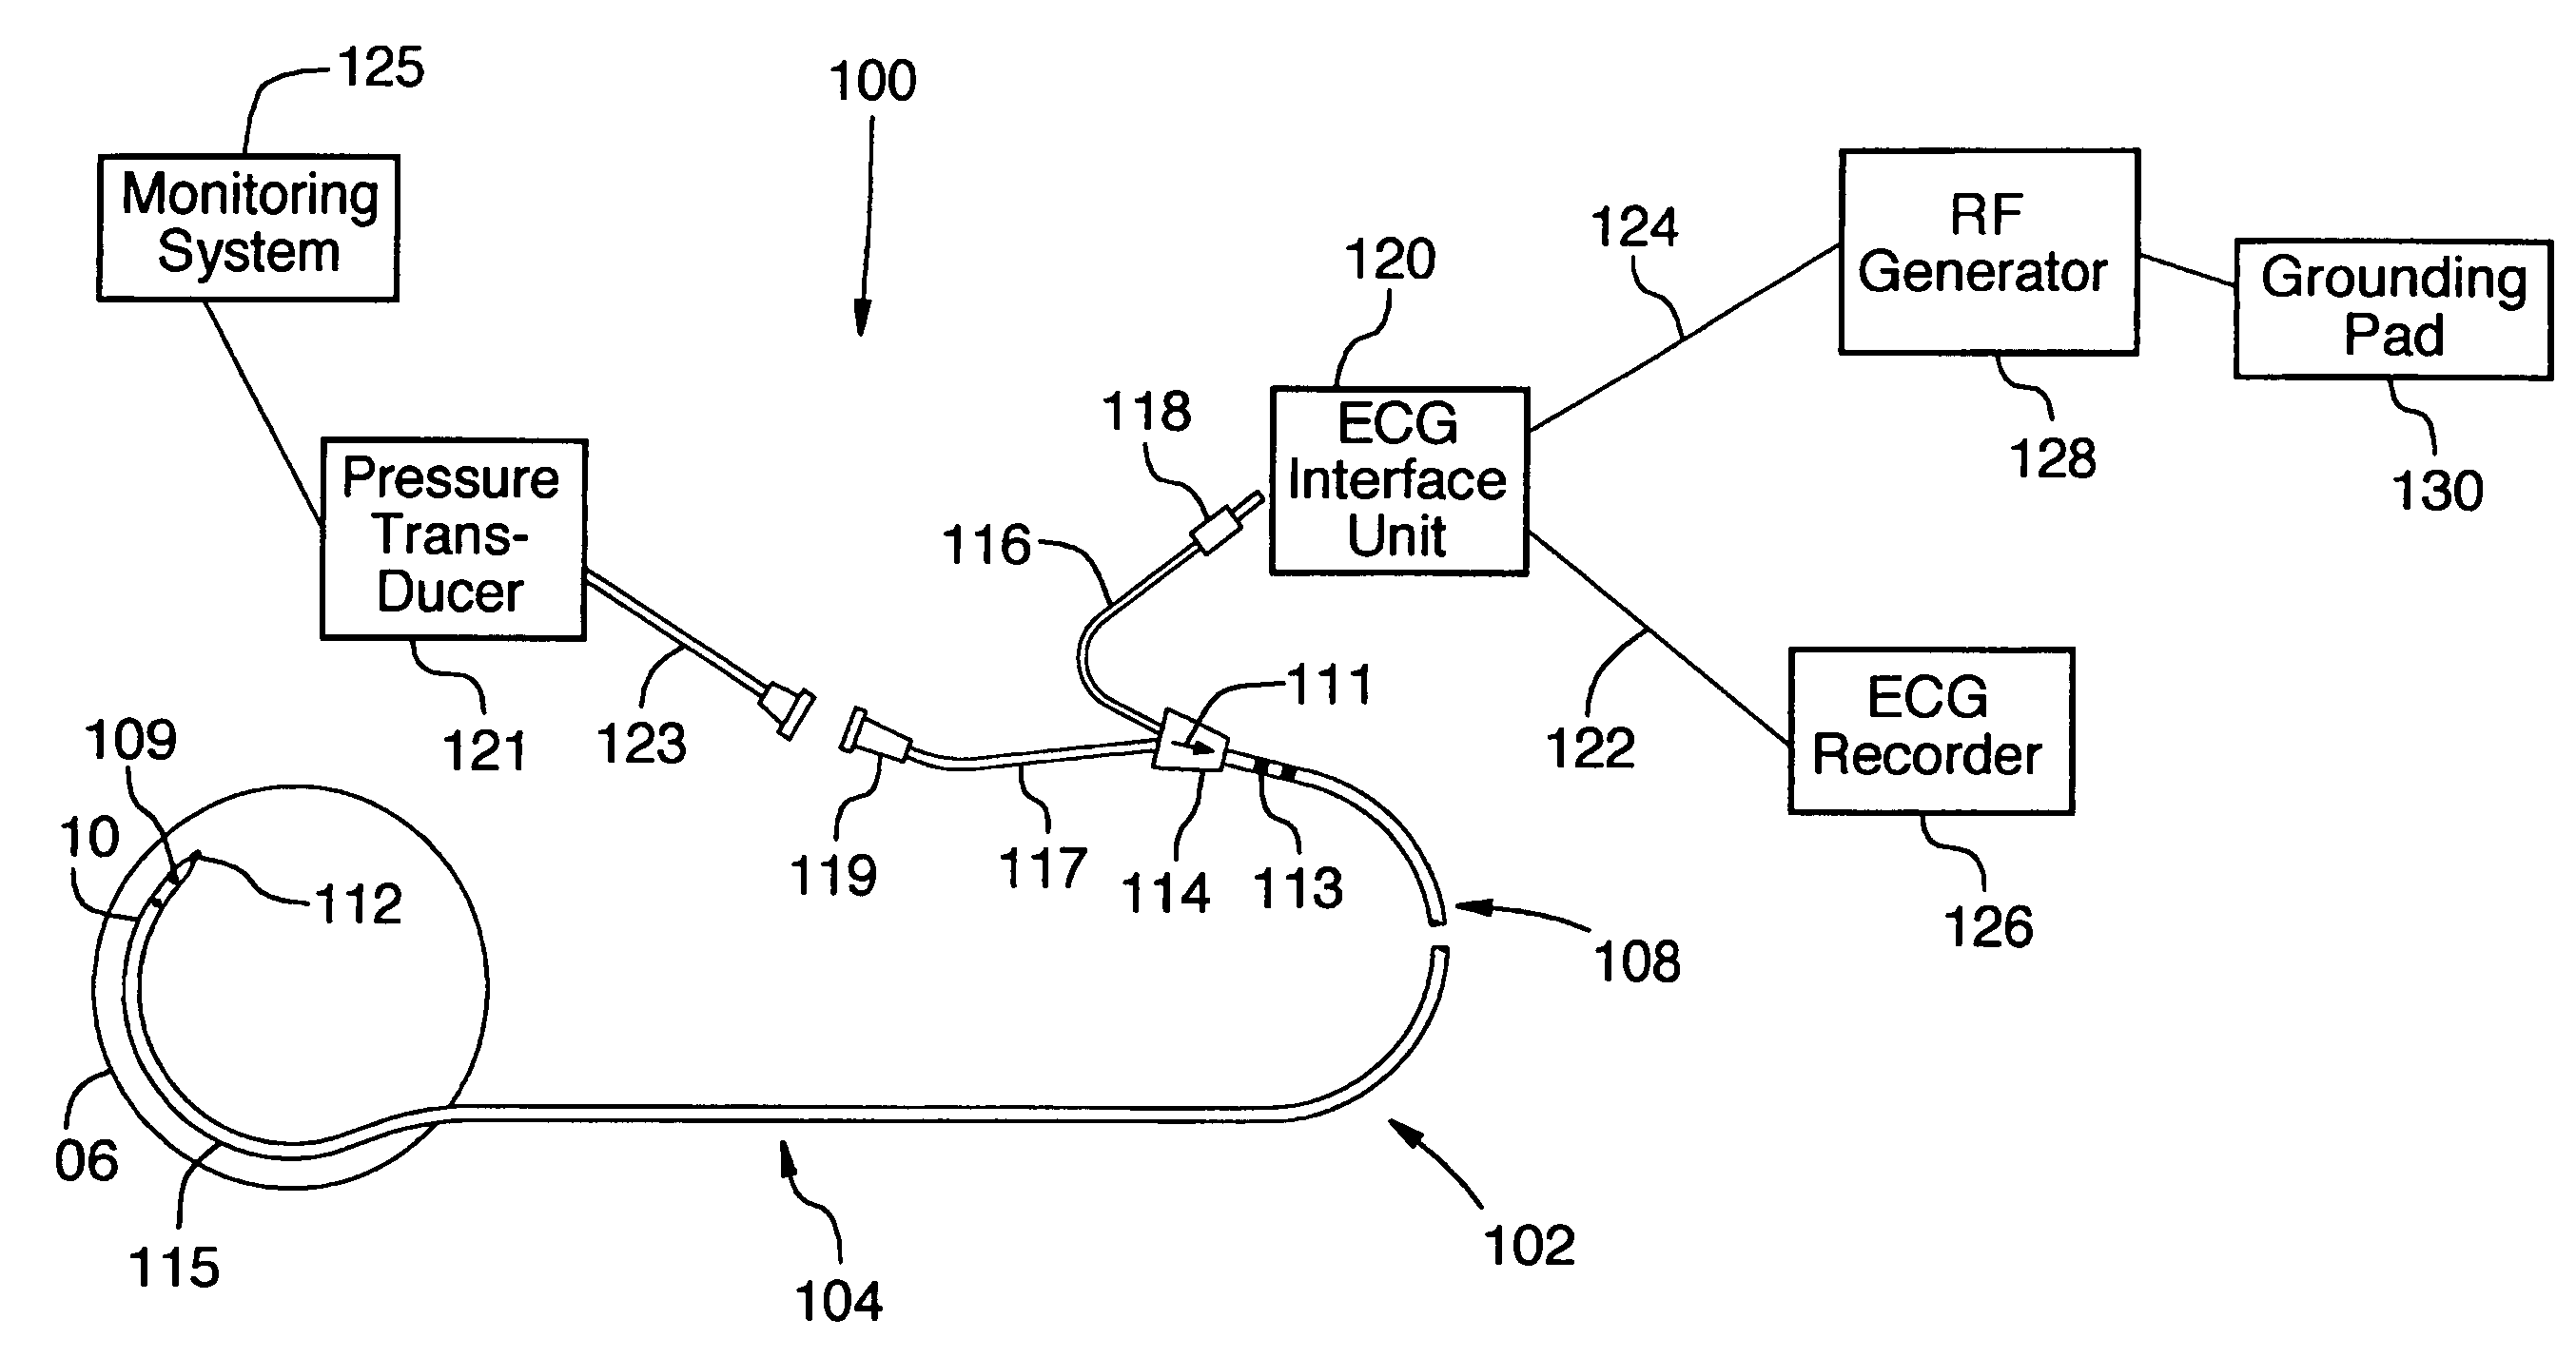 Method of surgical perforation via the delivery of energy